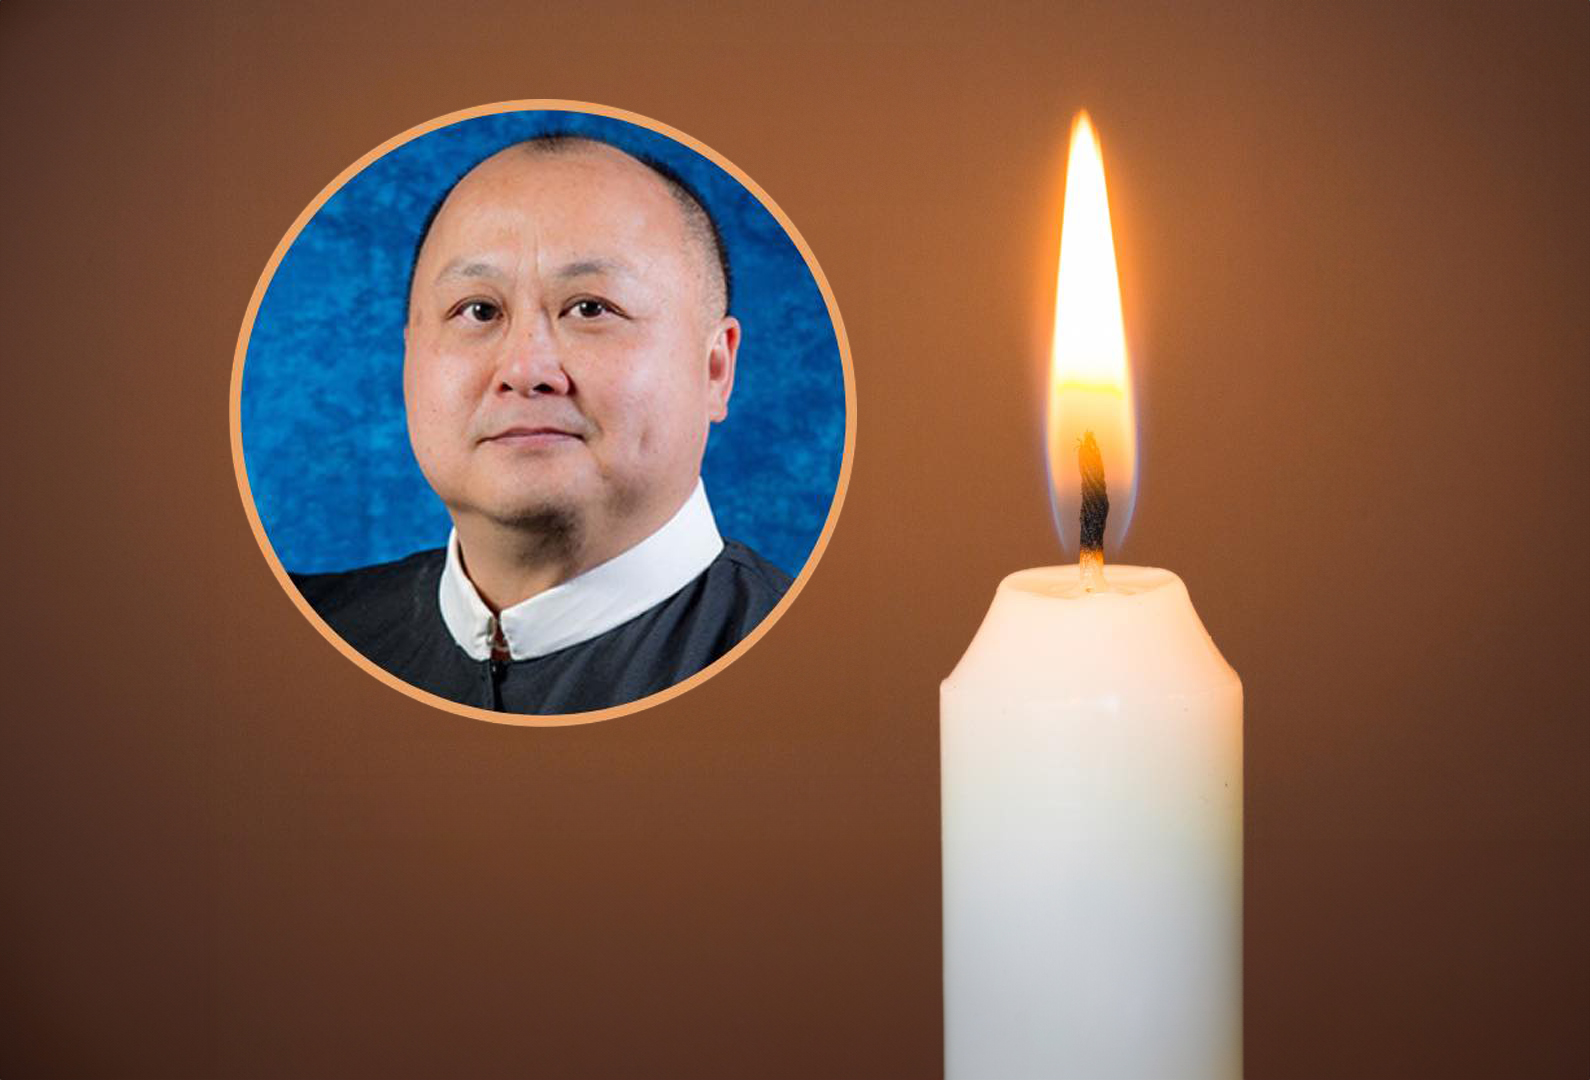 <div><div class="caption">
                  In Loving Memory of Rev. Gan Nguyen, C.Ss.R.
                  </div><div className="subcaption">
                  Aug. 7, 1964 - Apr. 14, 2024 • <i>Rest in the peace of the Redeemer</i>
                  </div></div>